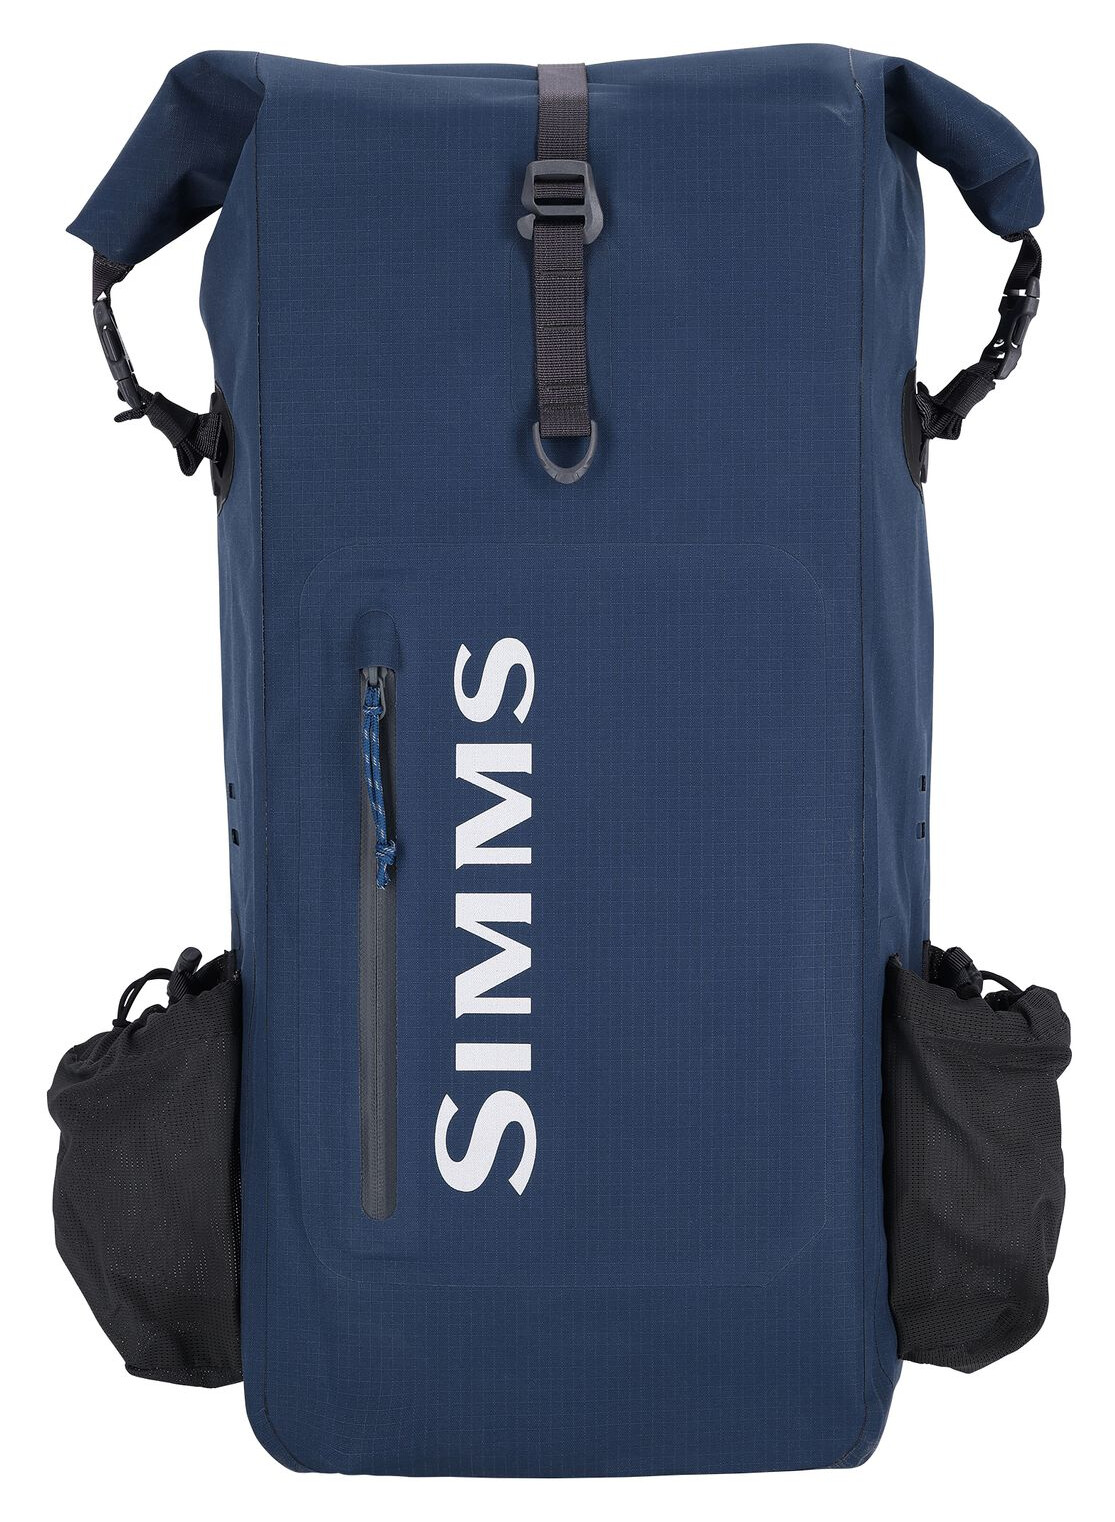 https://www.czechnymph.com/data/web/auto-imported-products/simms/simms-dry-creek-rolltop-backpack-9f1e858f.jpg